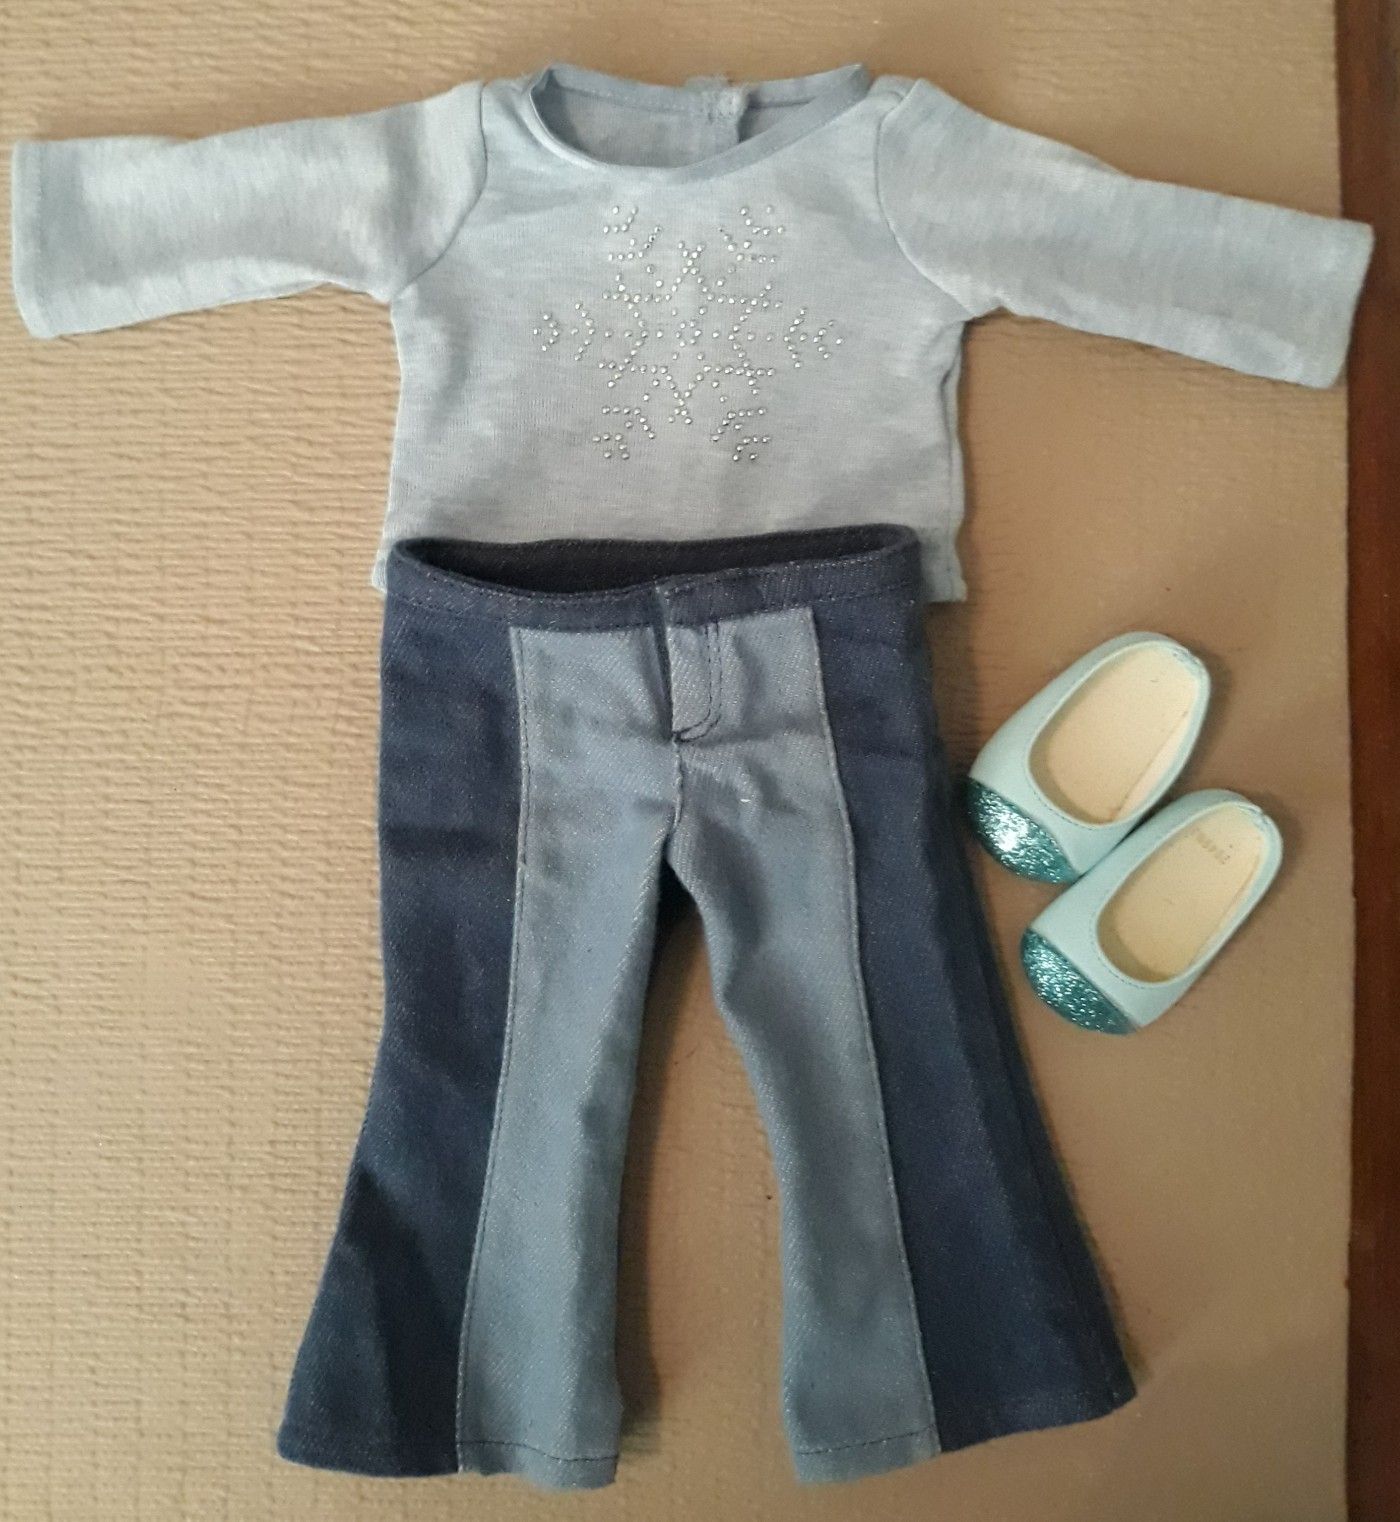 American girl doll outfit with shoes I'm in fontana message only when ready to pick up